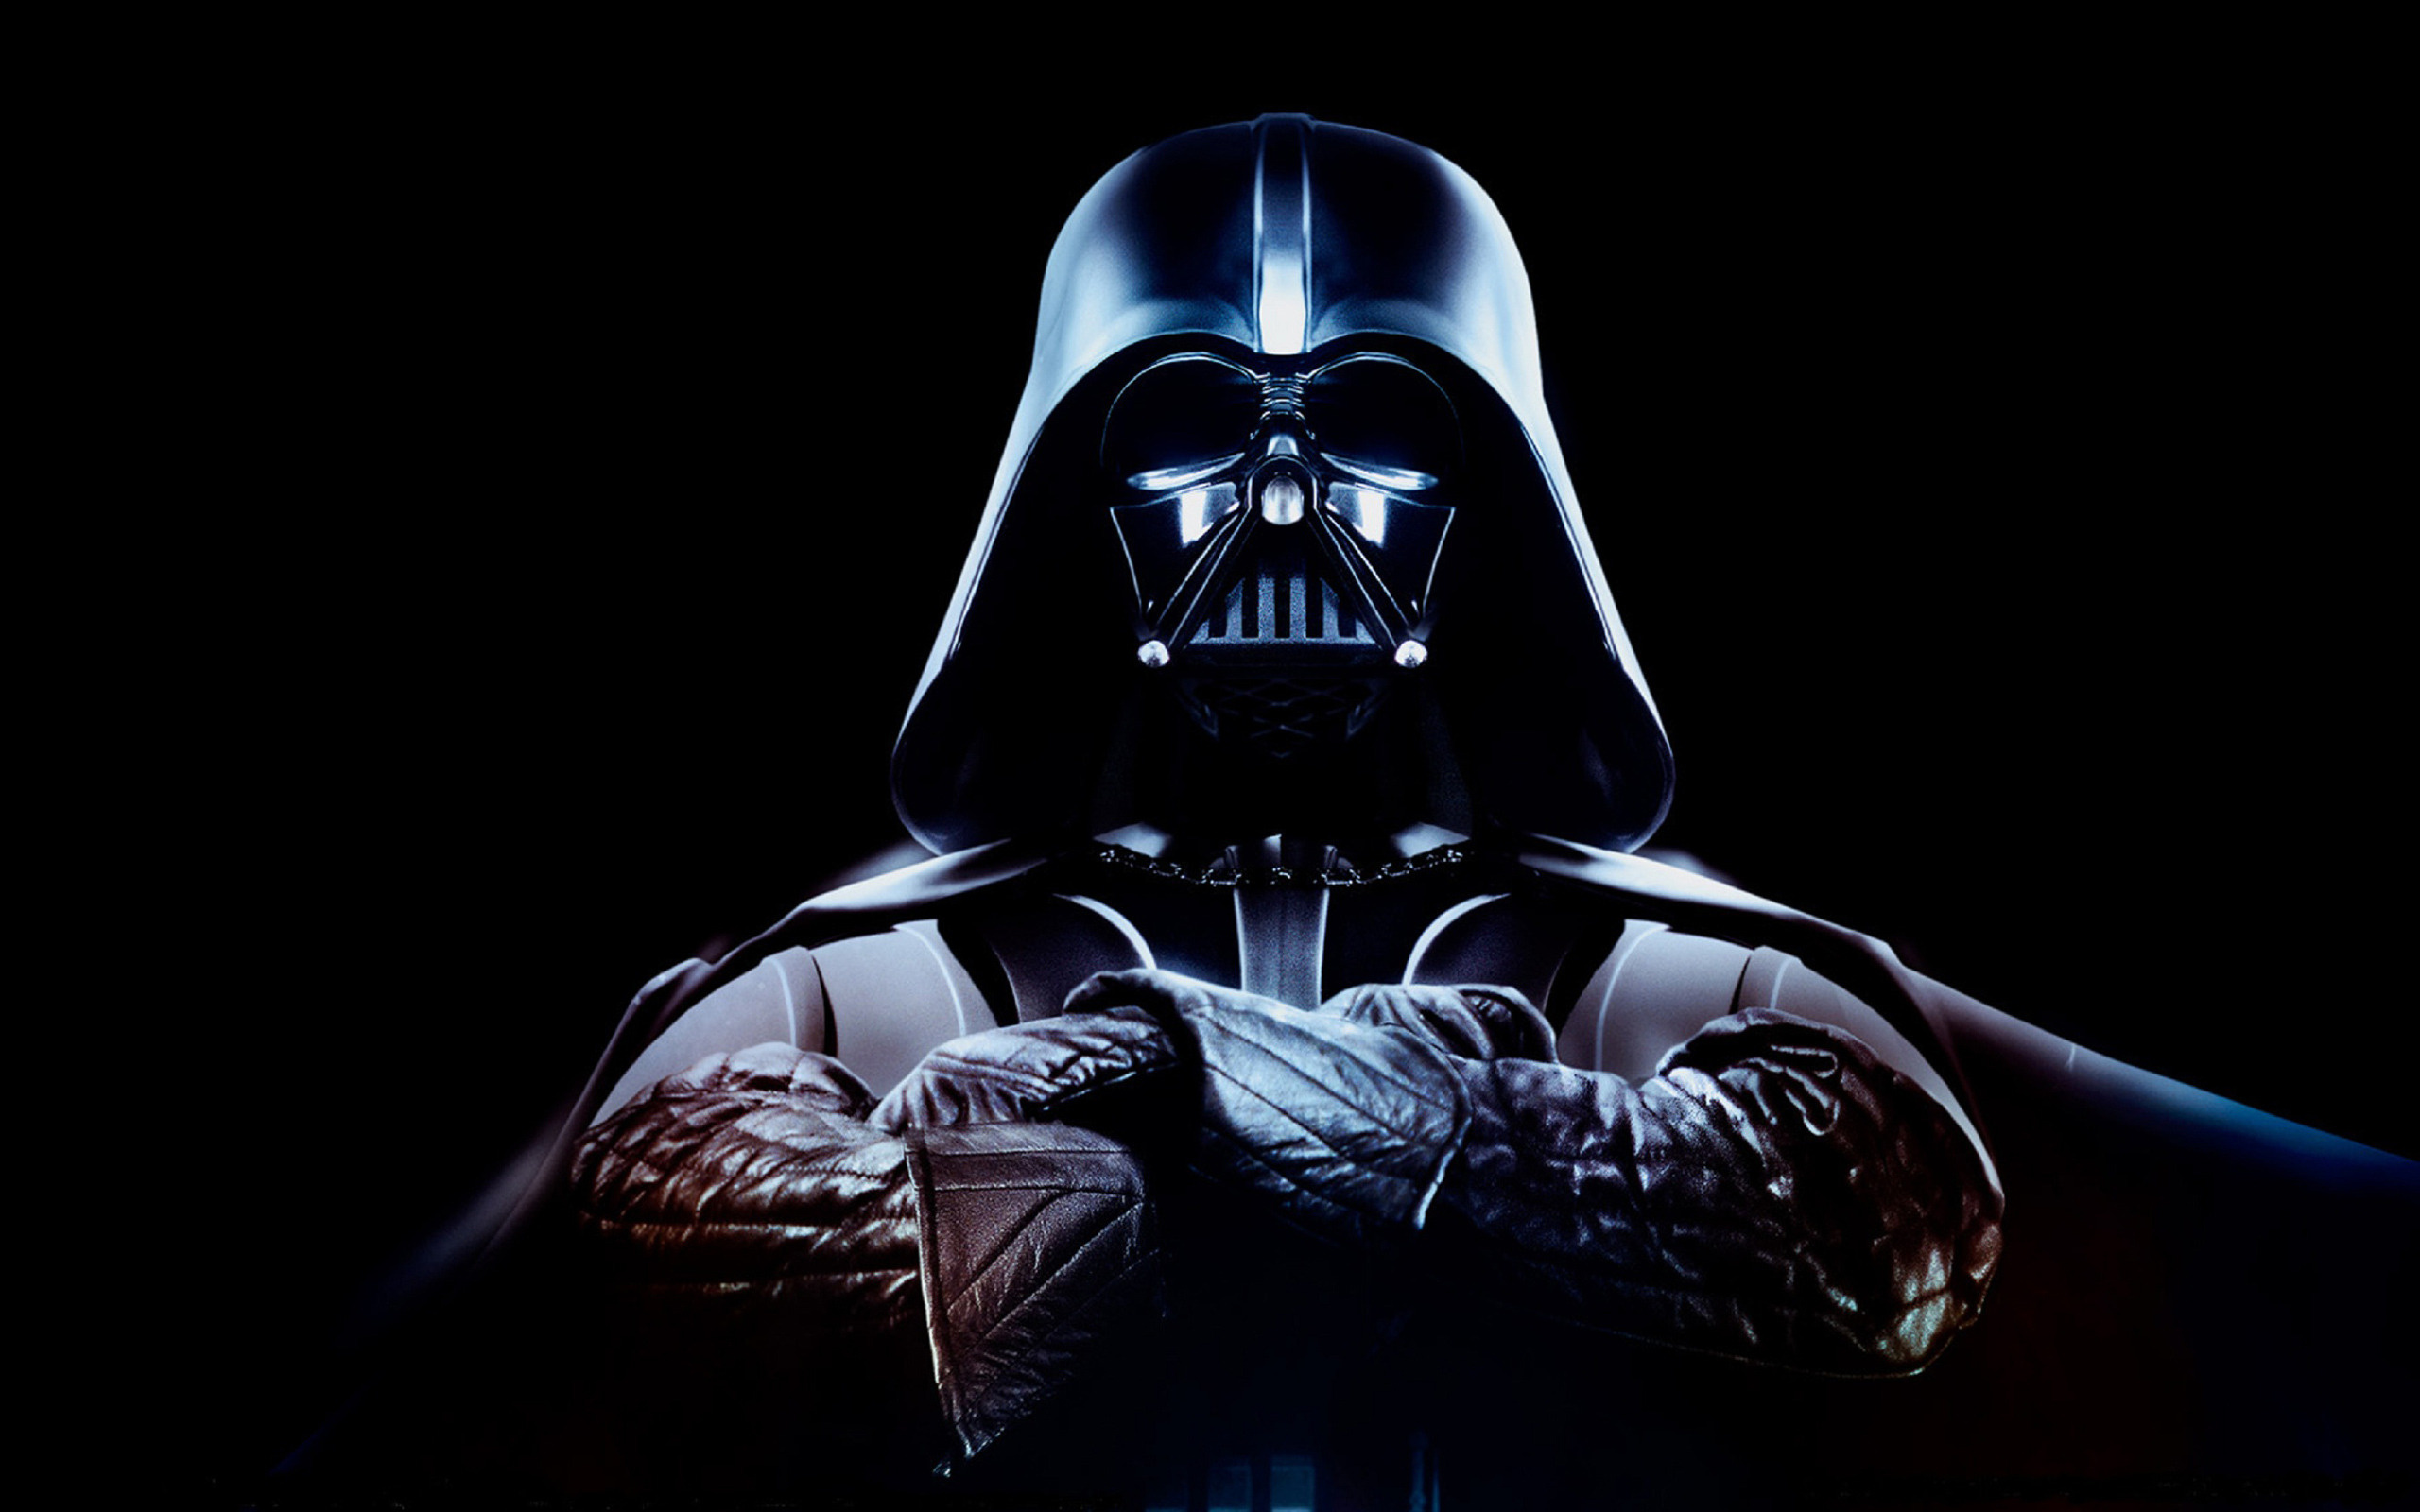 Darth Vader: James Earl Jones has voiced the character in all of Star Wars films. 2560x1600 HD Wallpaper.